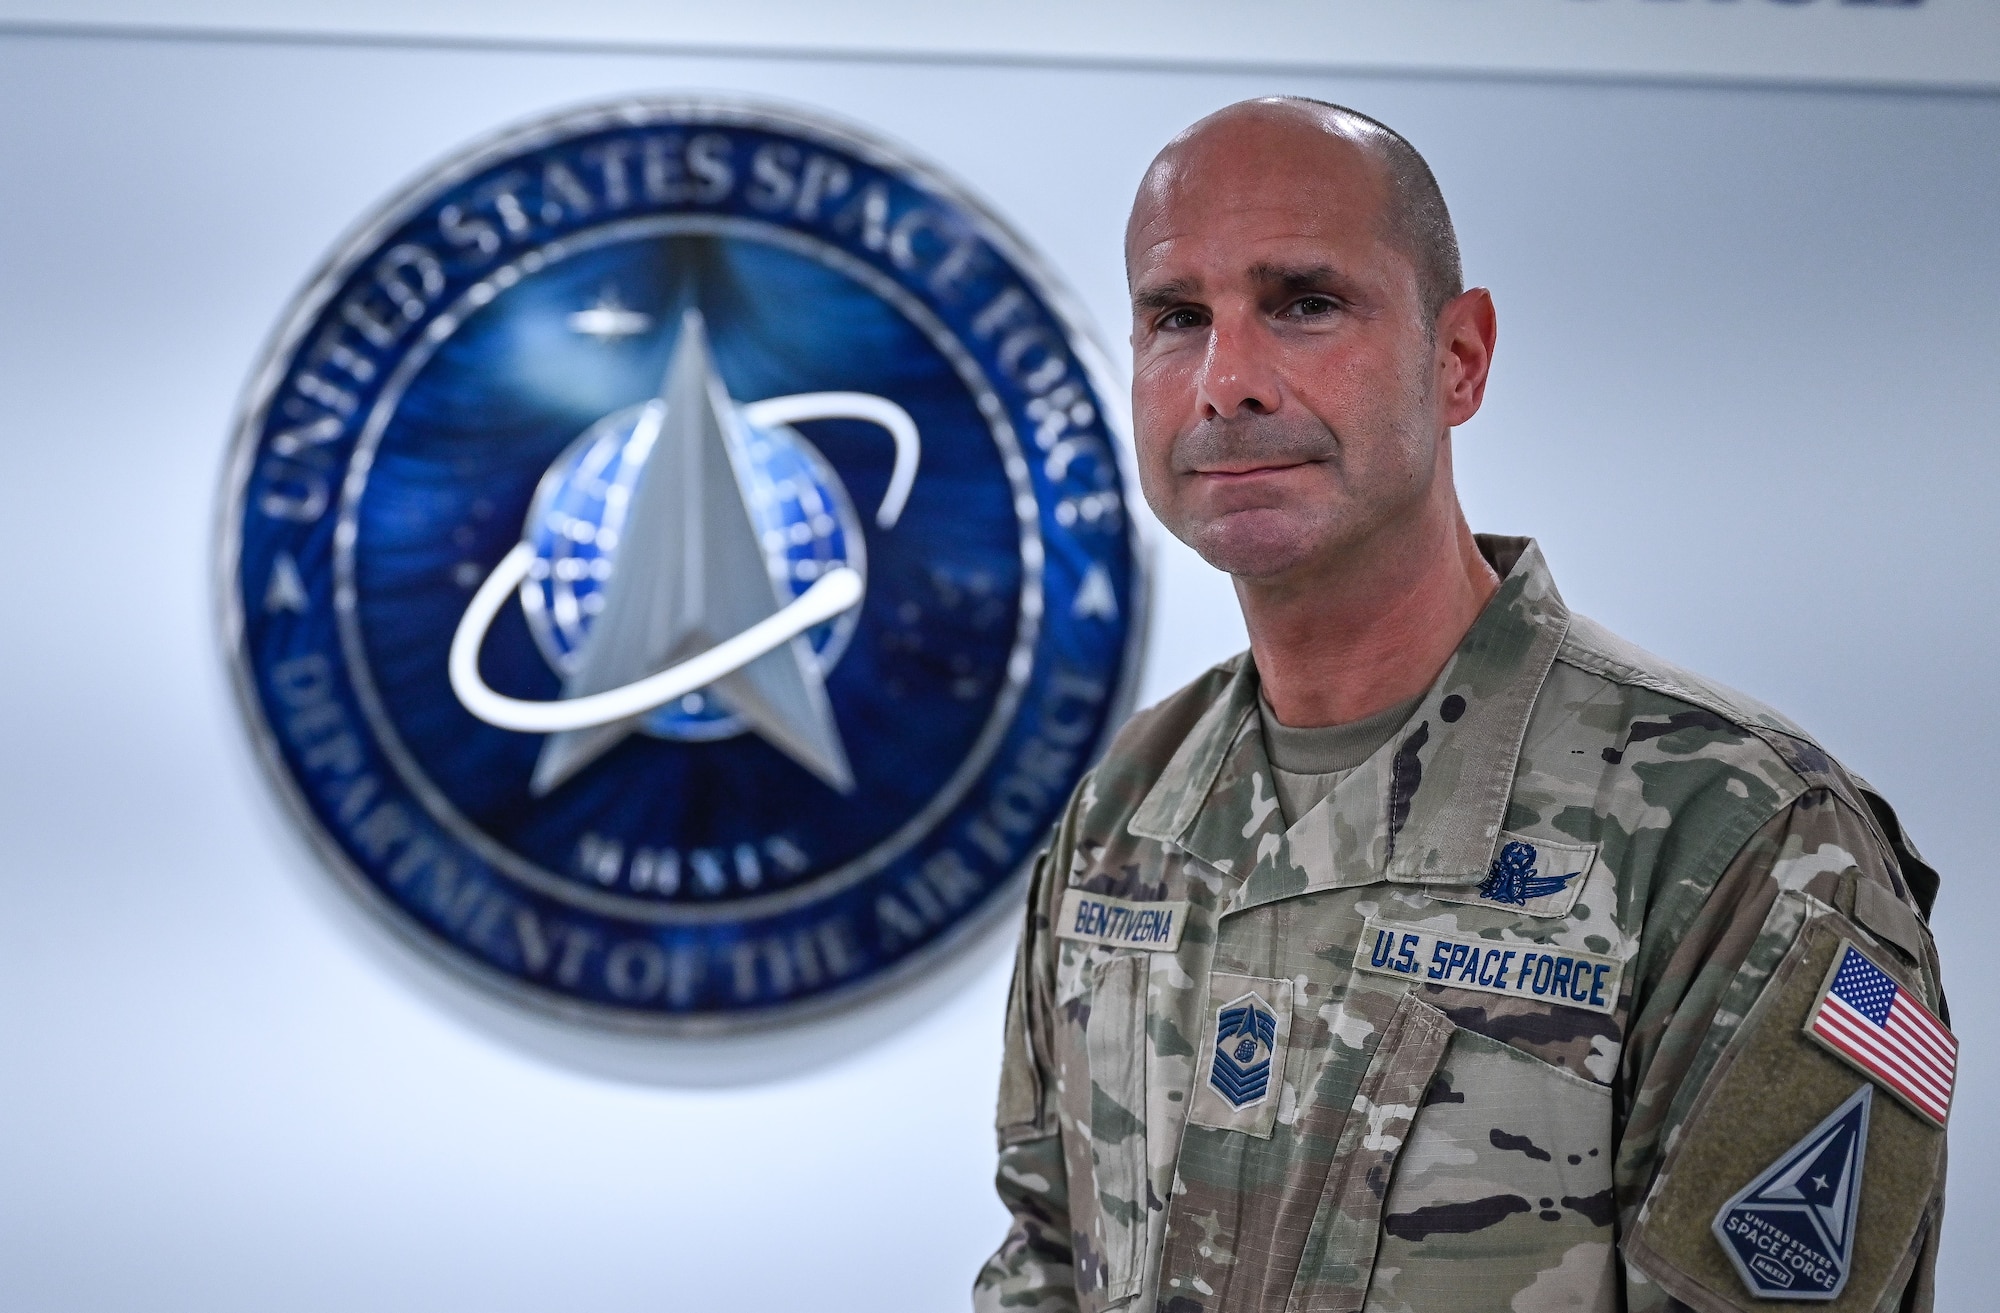 Chief Master Sgt. John F. Bentivegna stands in front of the U.S. Space Force Hallway after receiving news on his selection as the next Chief Master Sergeant of the Space Force, Pentagon, Arlington, Va., May 5, 2023. (U.S. Space Force photo by Senior Master Sgt. Sara Keller)